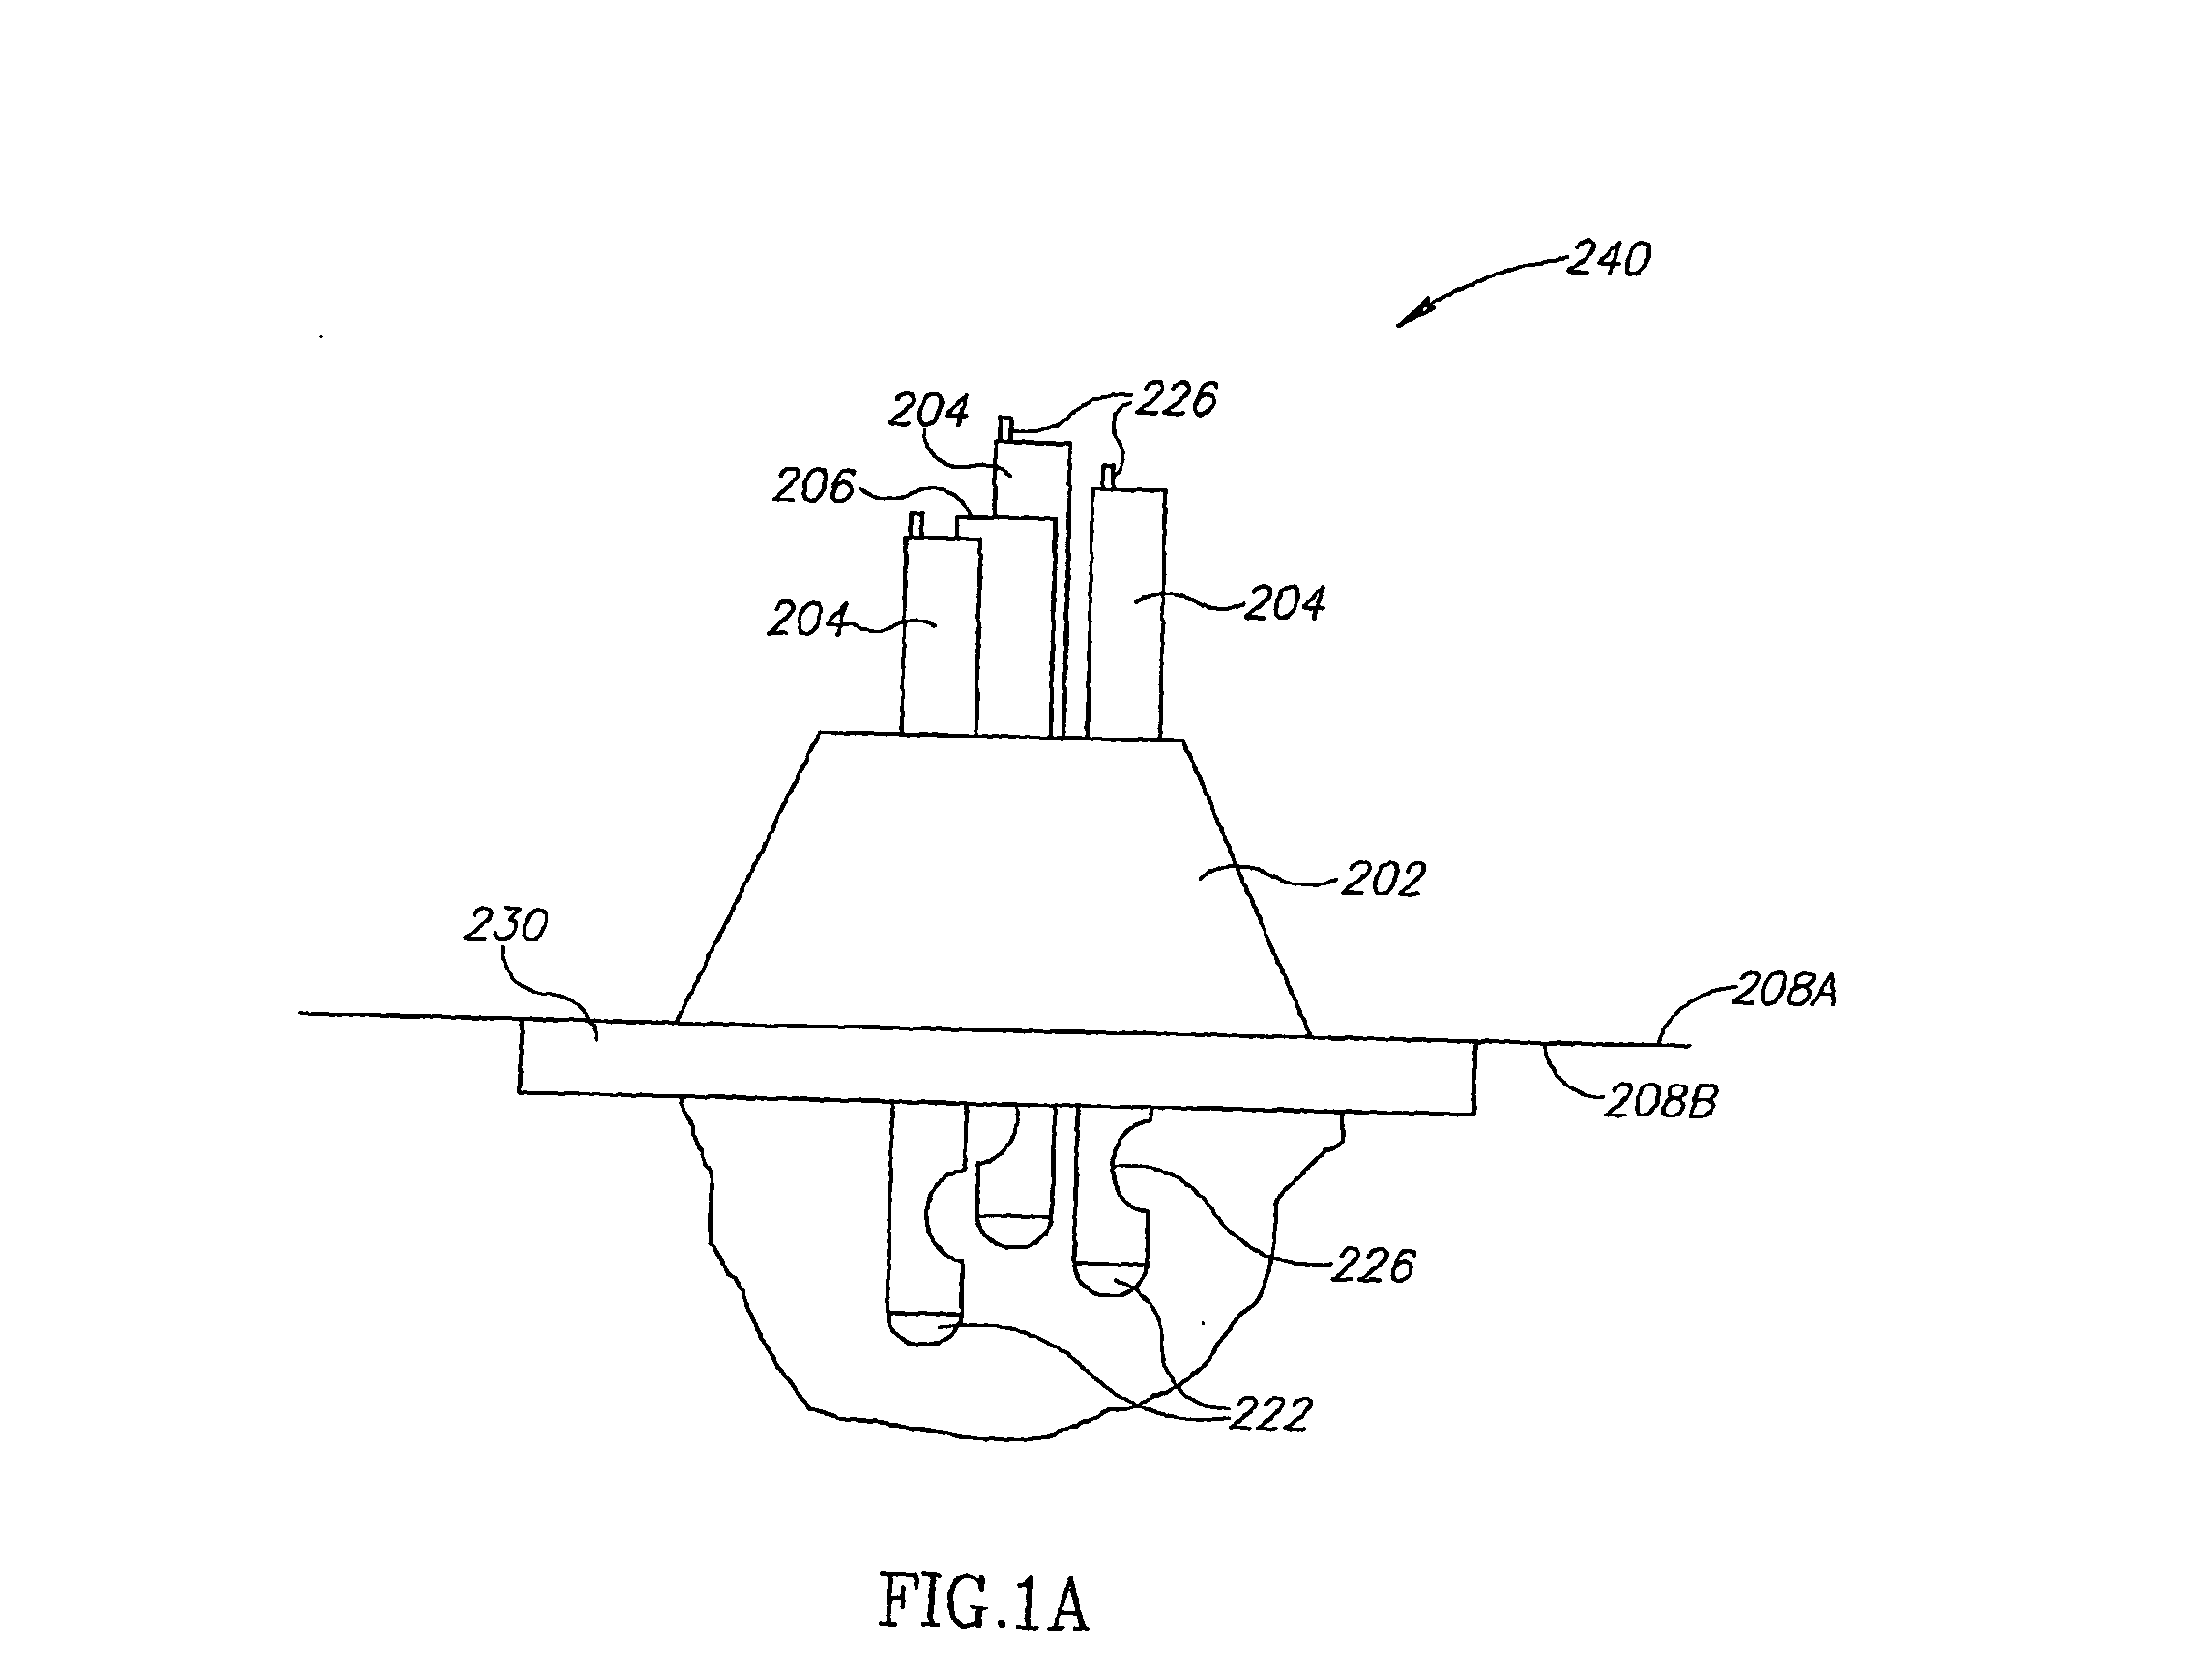 Apparatus and methods for enzymatic debridement of skin lesions